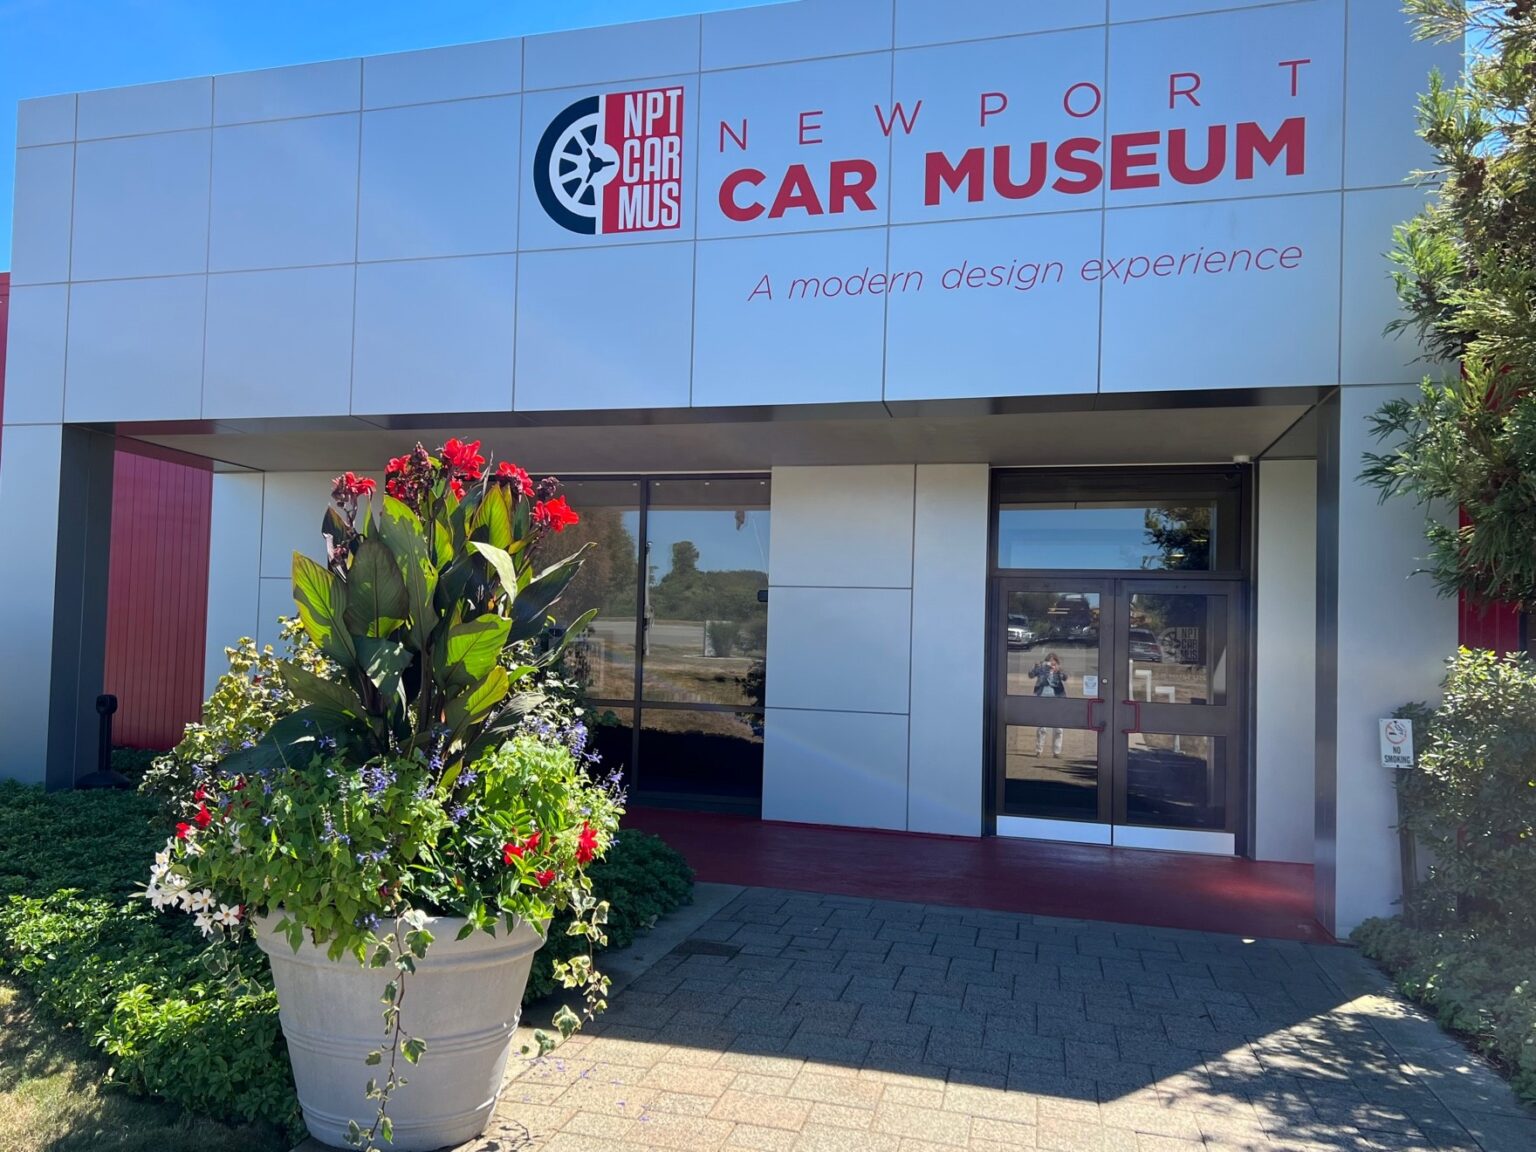 The Newport Car Museum is the largest automotive museum on the East Coast.